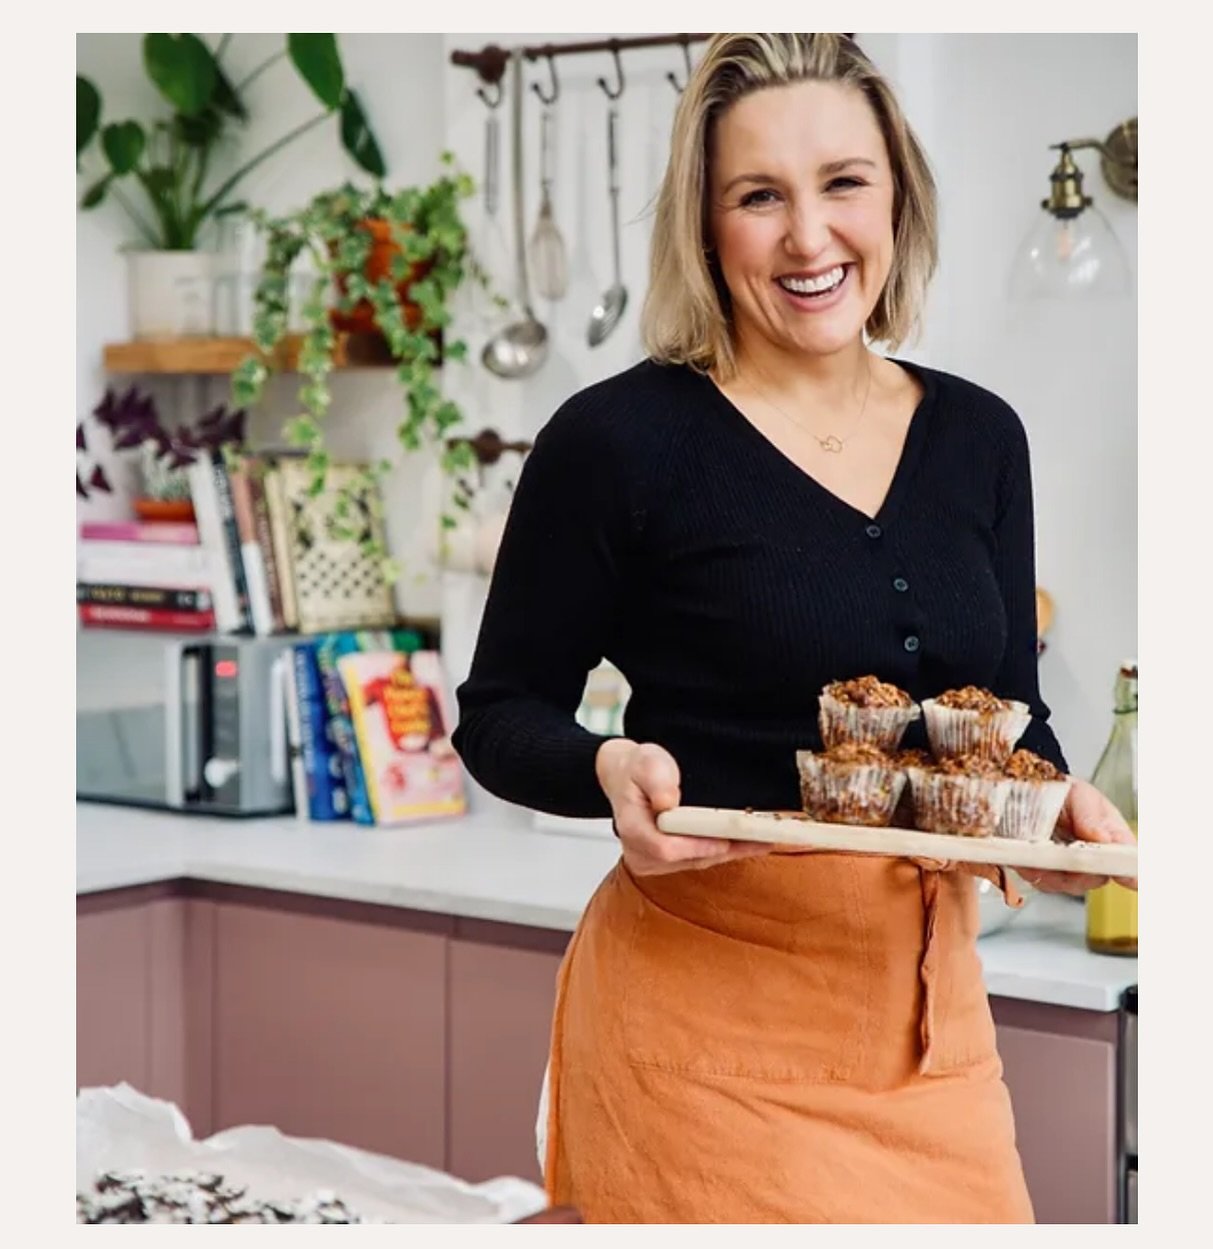 Happy Friday! We want to have a very loud shout out for our Freya who is on the verge of launching @themamamenu - a business which will deliver nutritional, comforting food to post-partem women. The menu - which arrives in the post and goes straight 